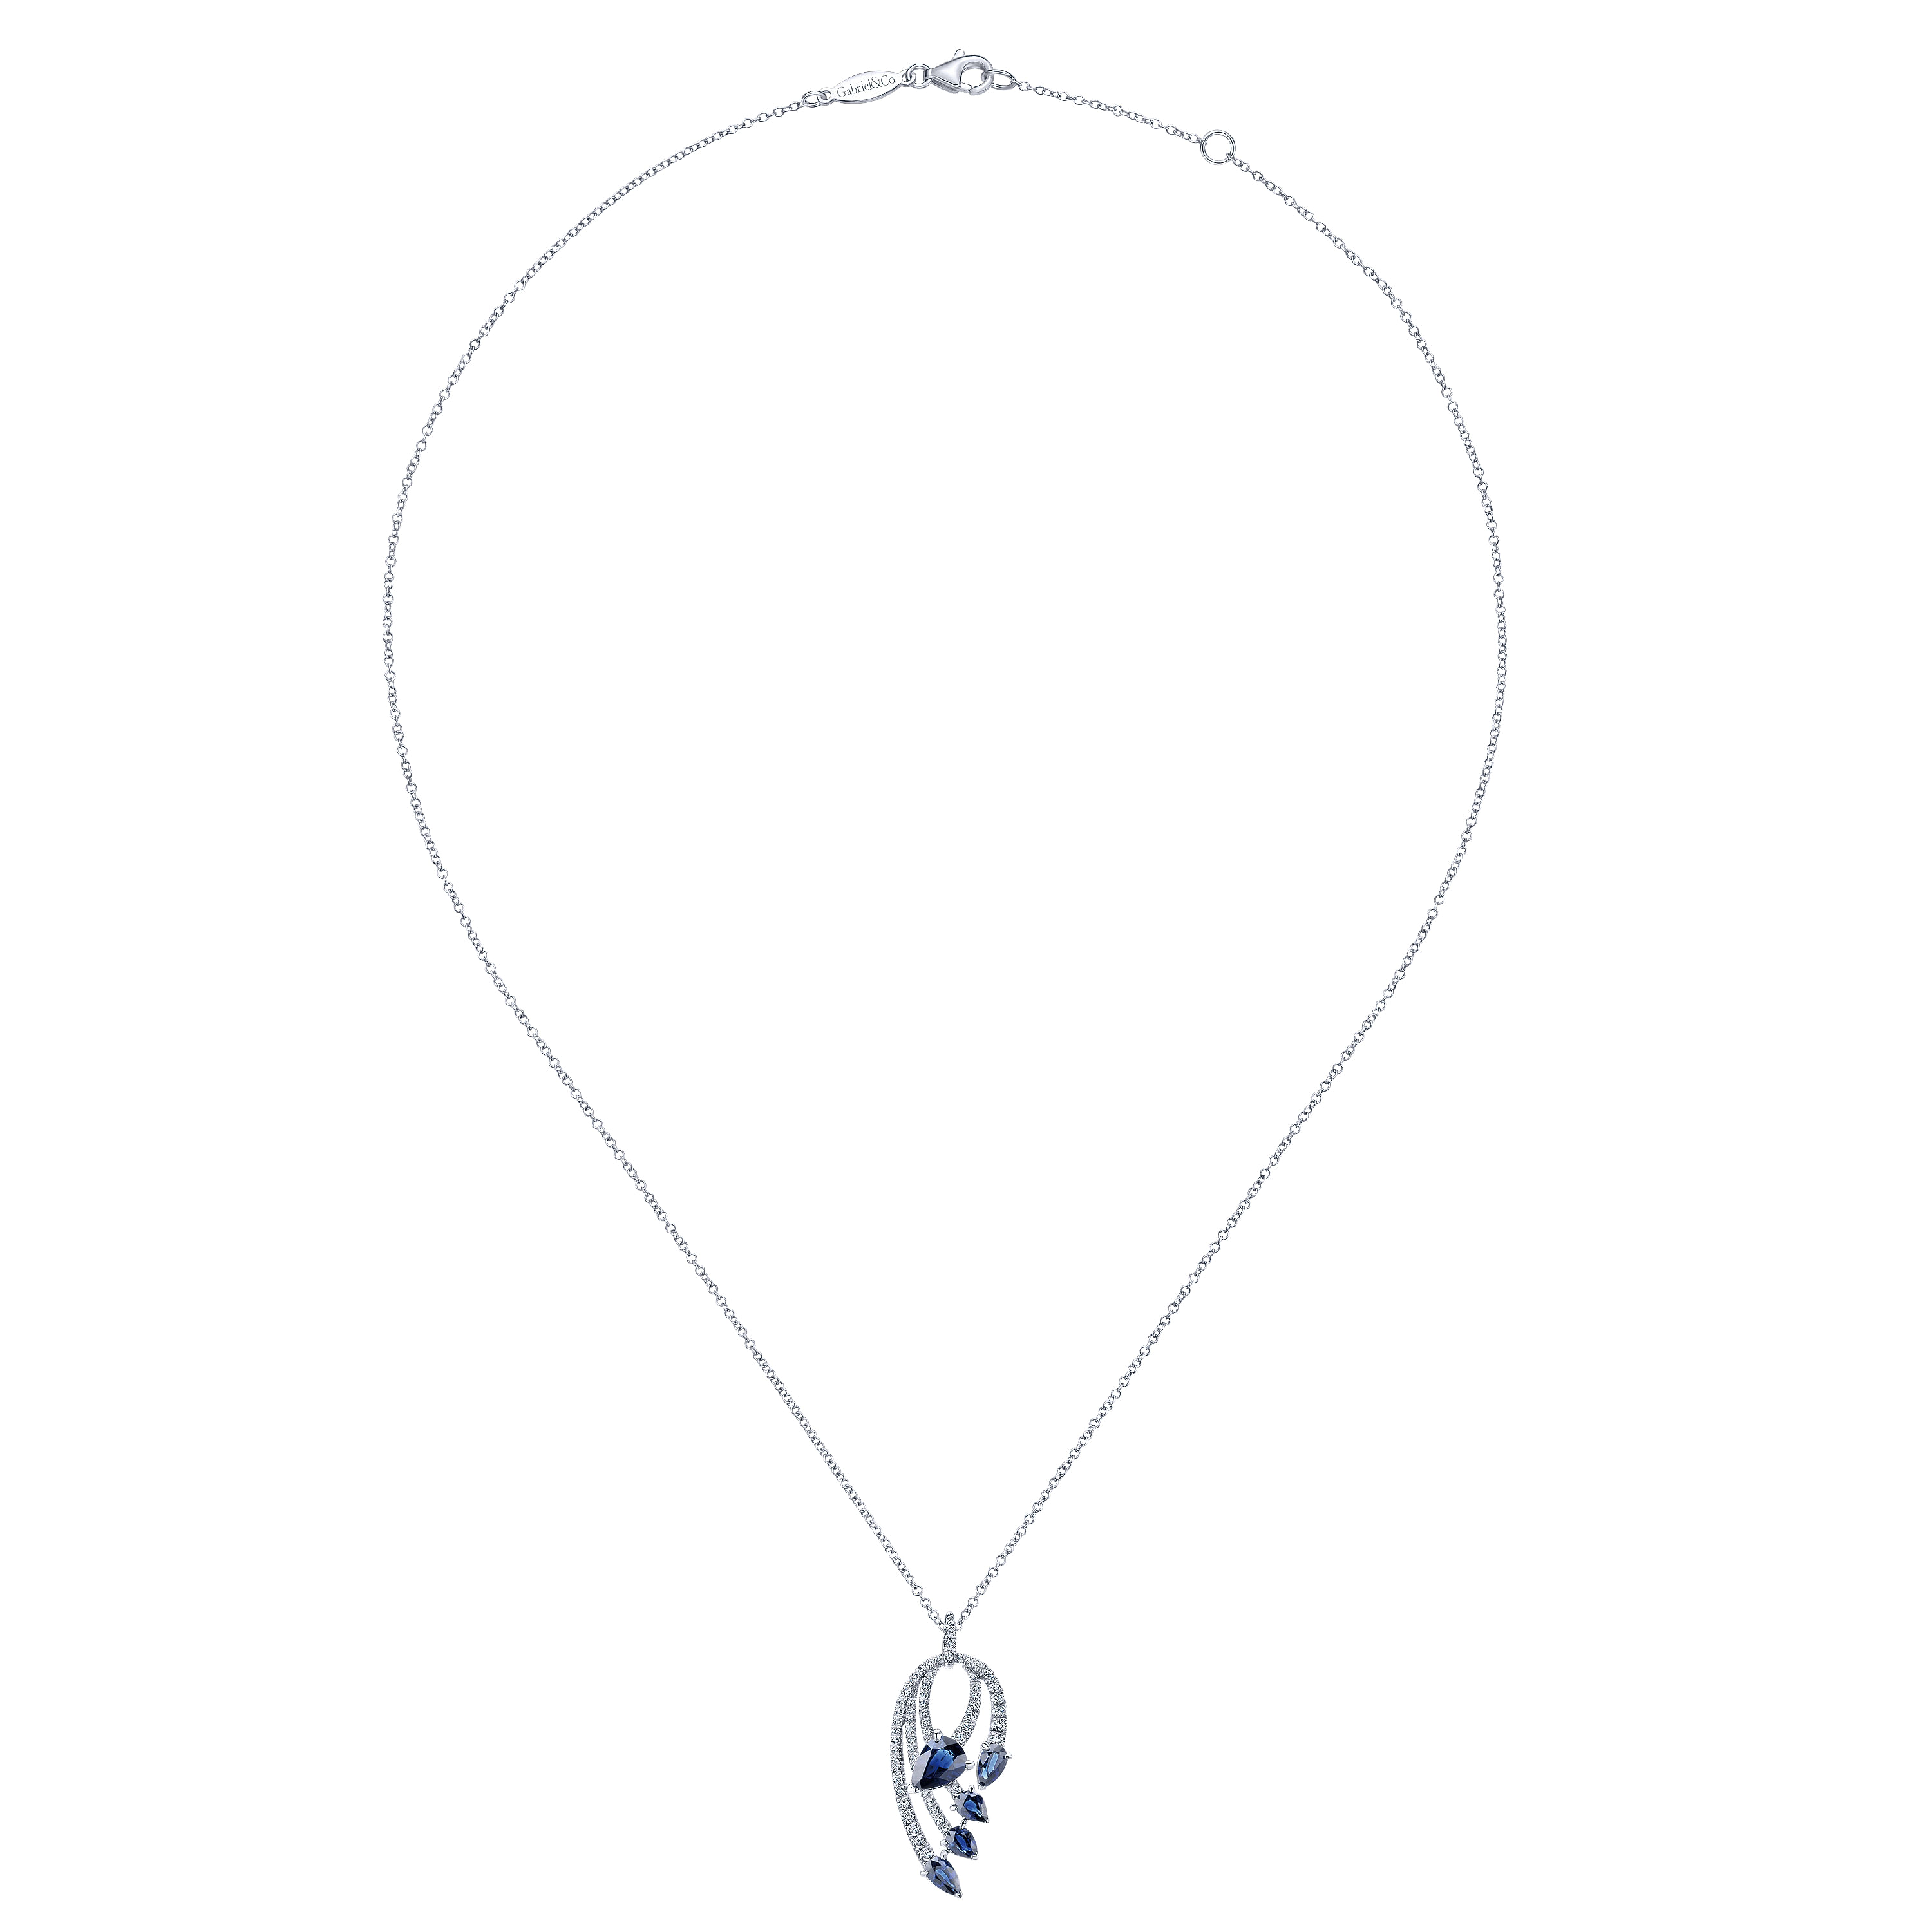 14K White Gold Pear Shaped Sapphire and Diamond Curved Pendant Necklace